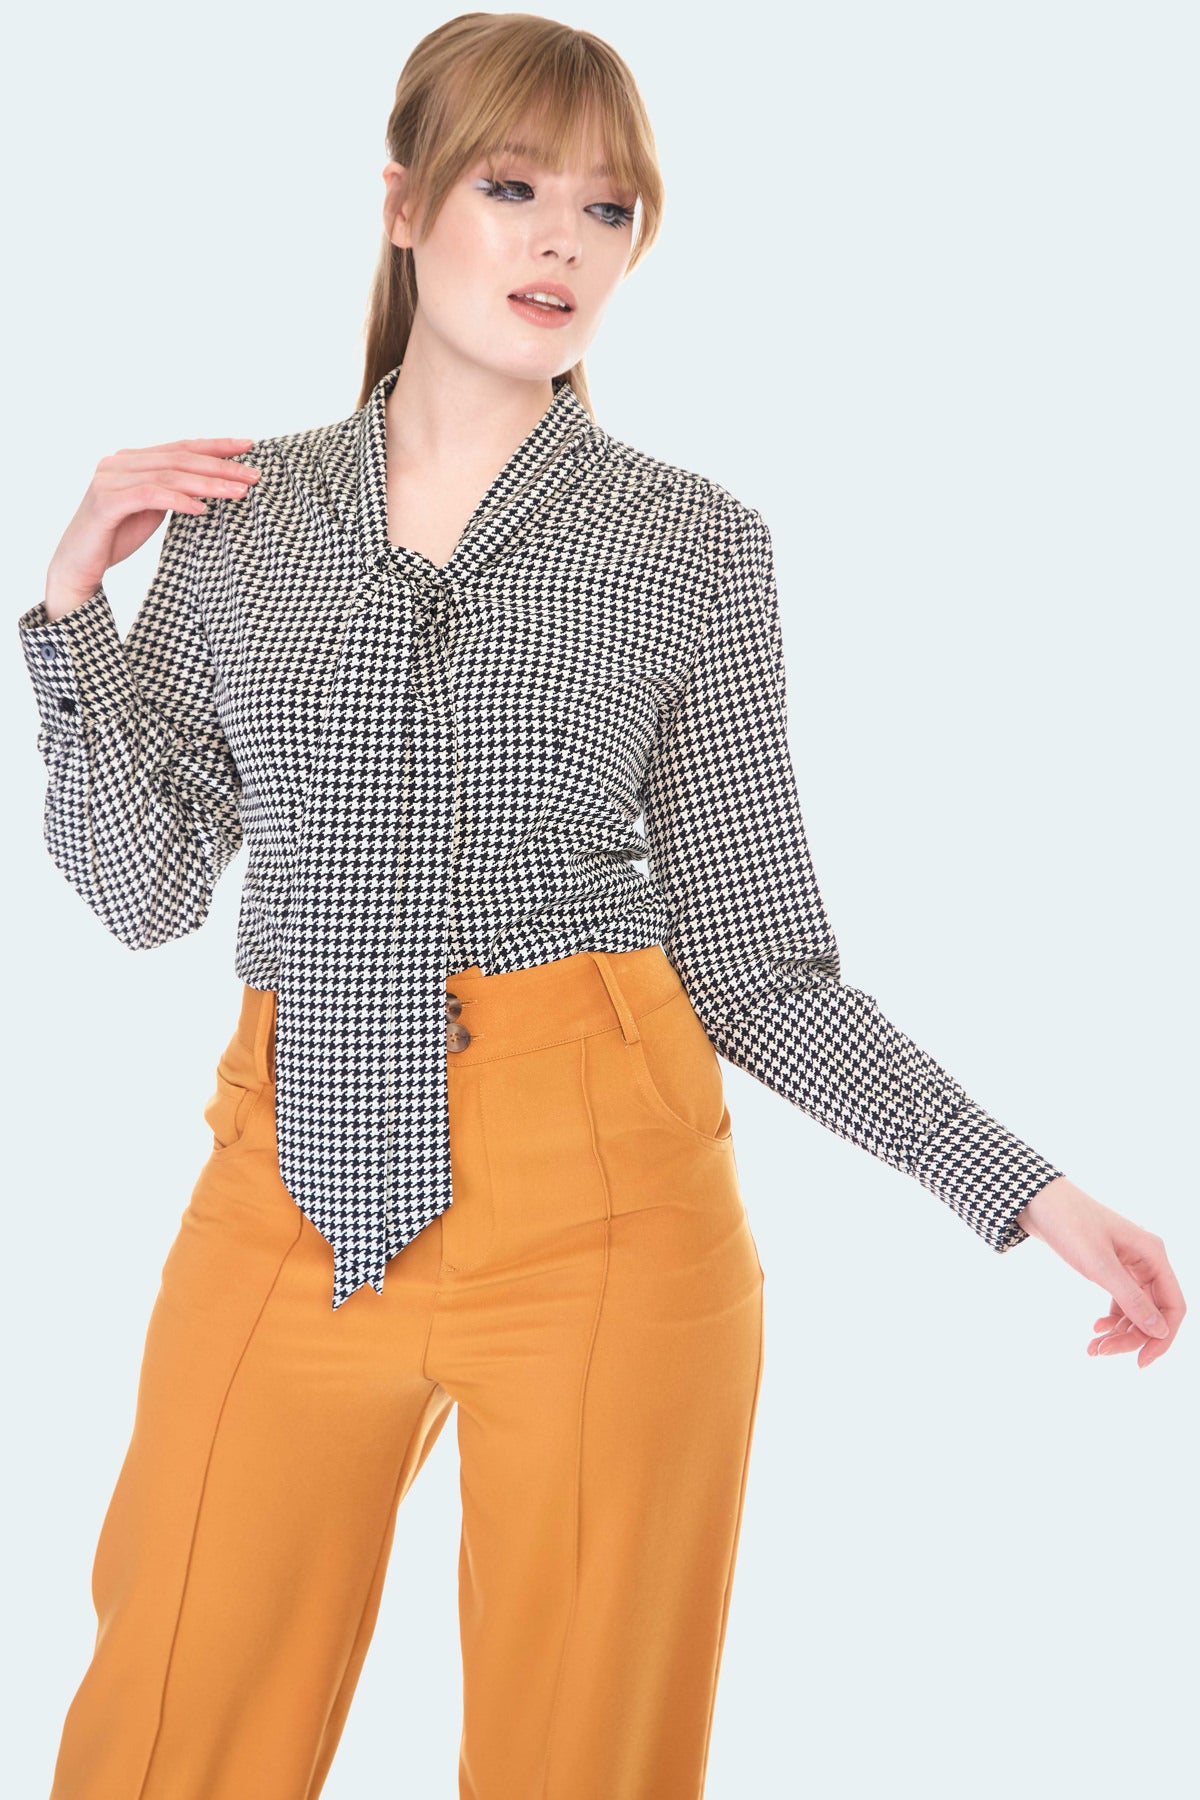 A 3/4 length shot to show the blouse tucked into a pair of high waisted pants 